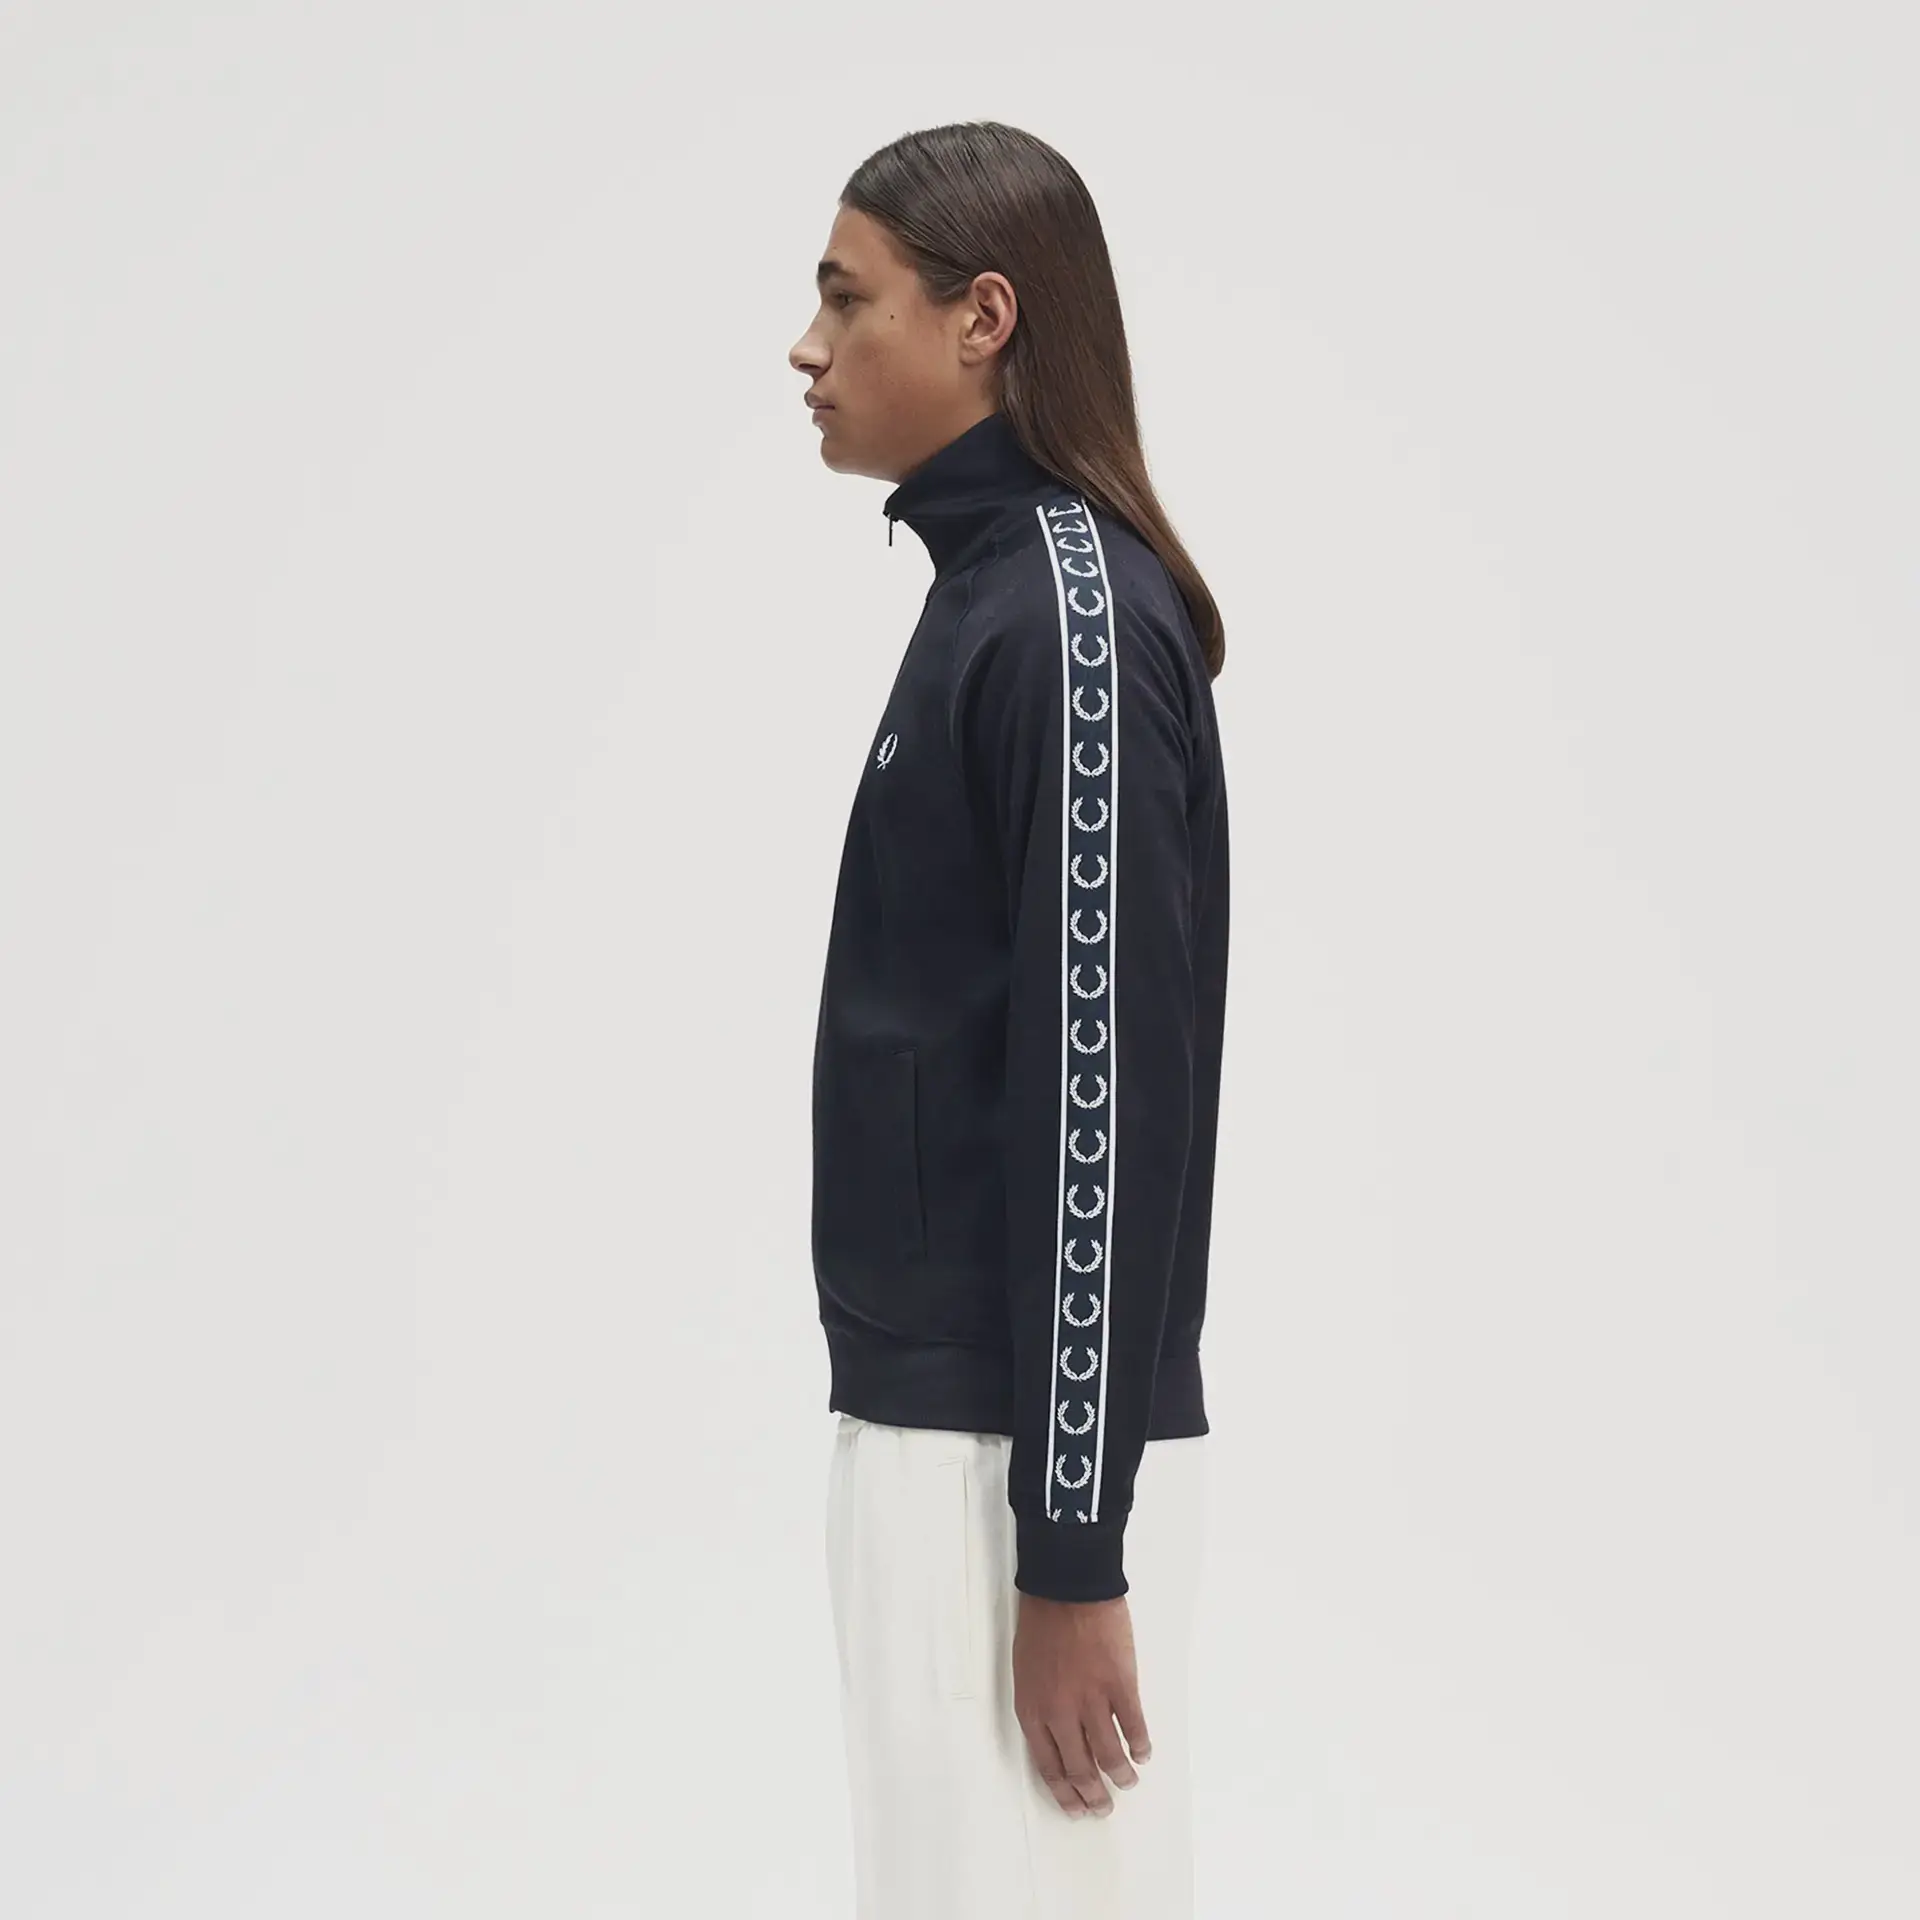 Fred Perry Contrast Tape Track Jacket Navy